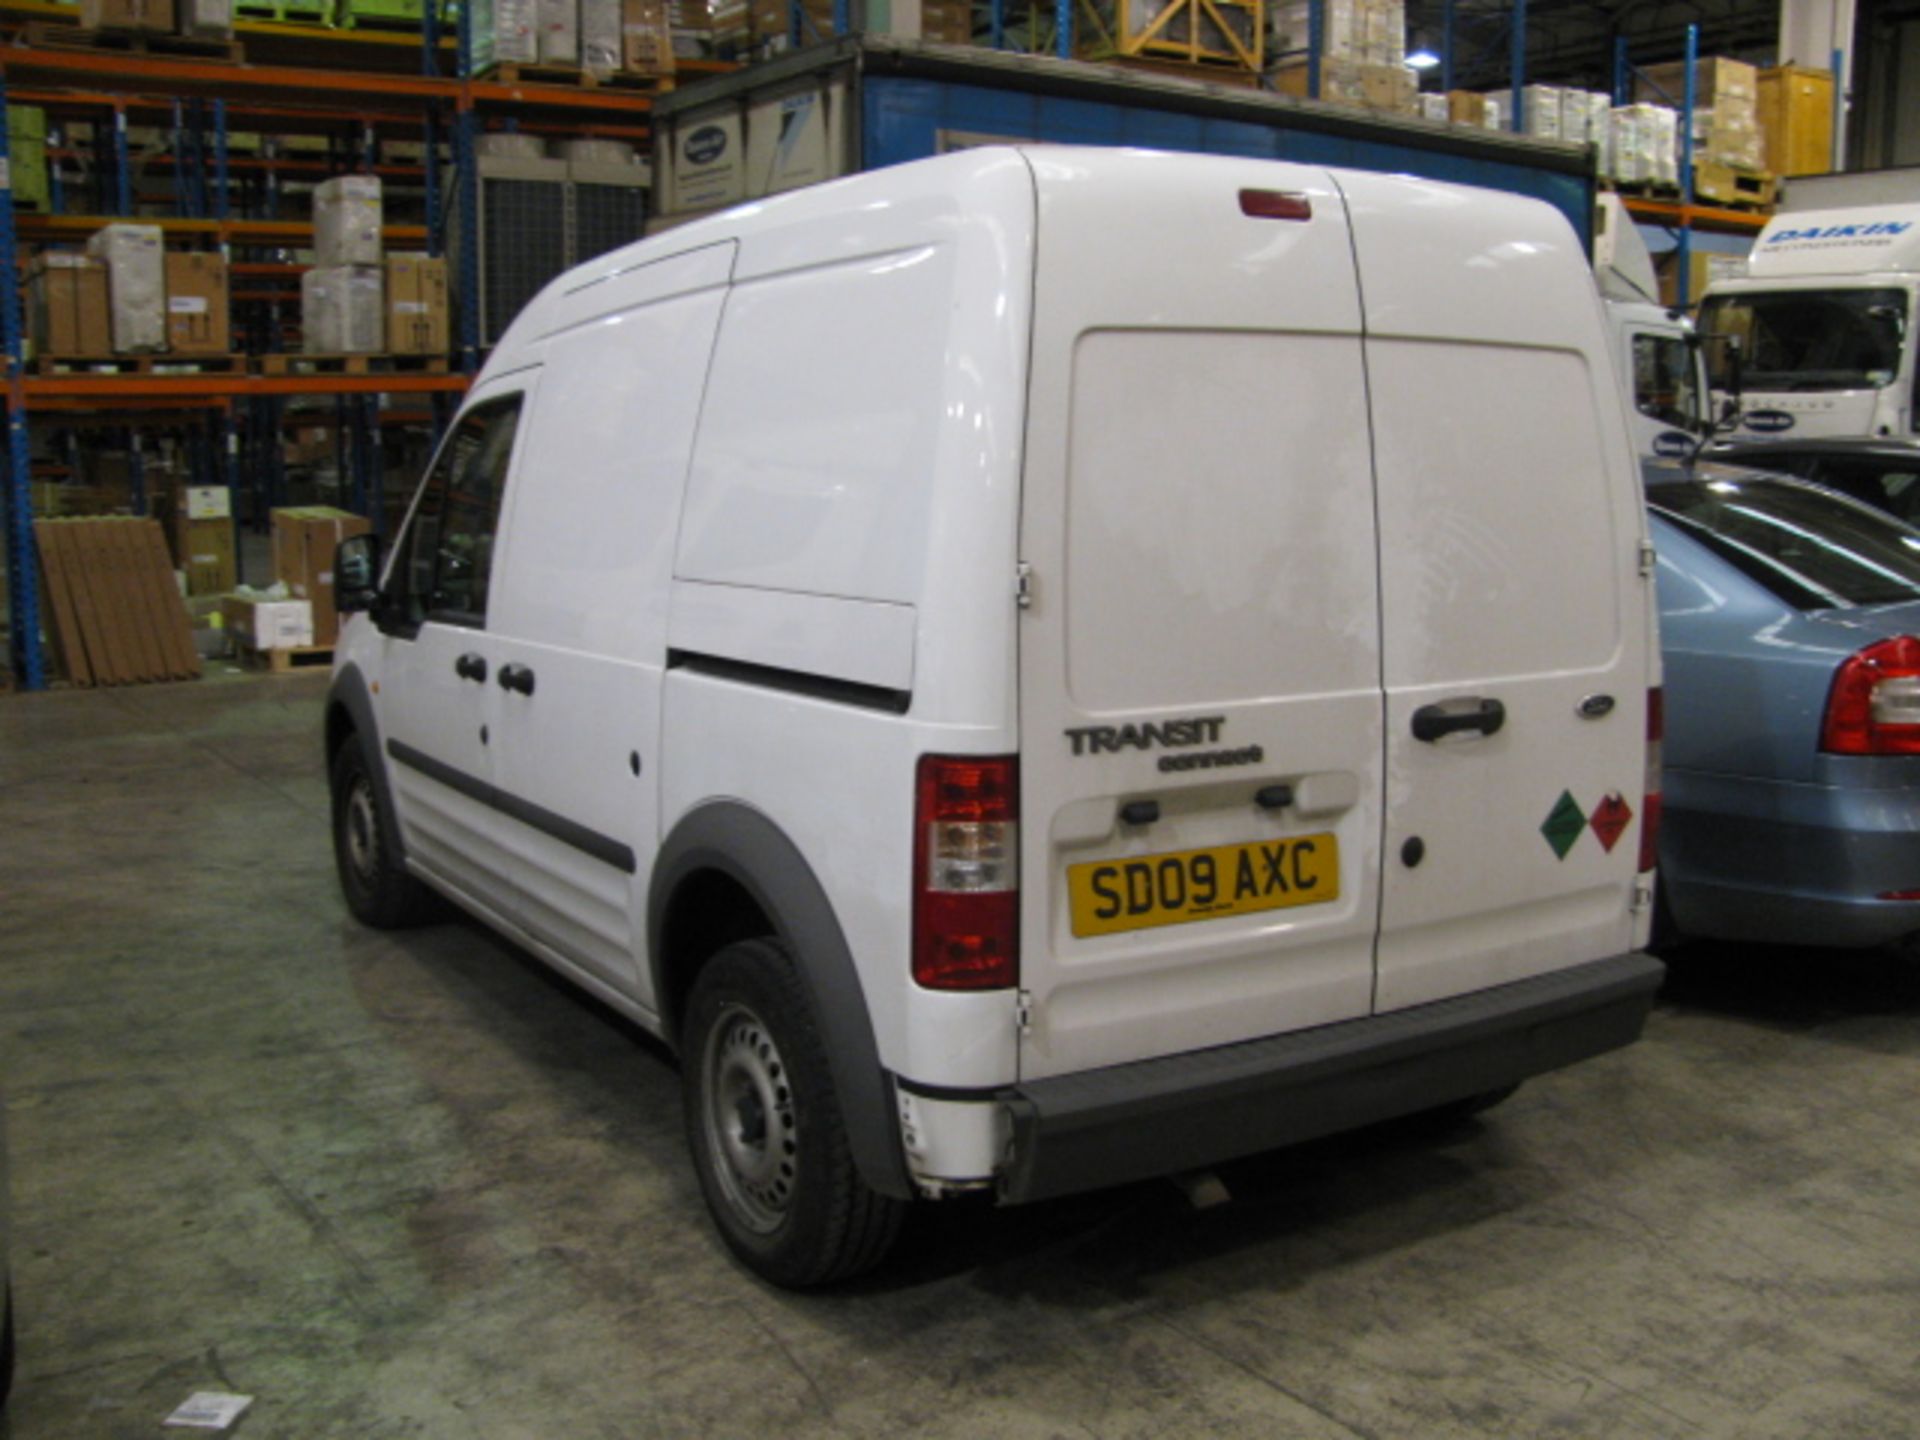 Ford Transit Connect 90T 230L reg SD09 AXC miles 68,427 - Image 3 of 4